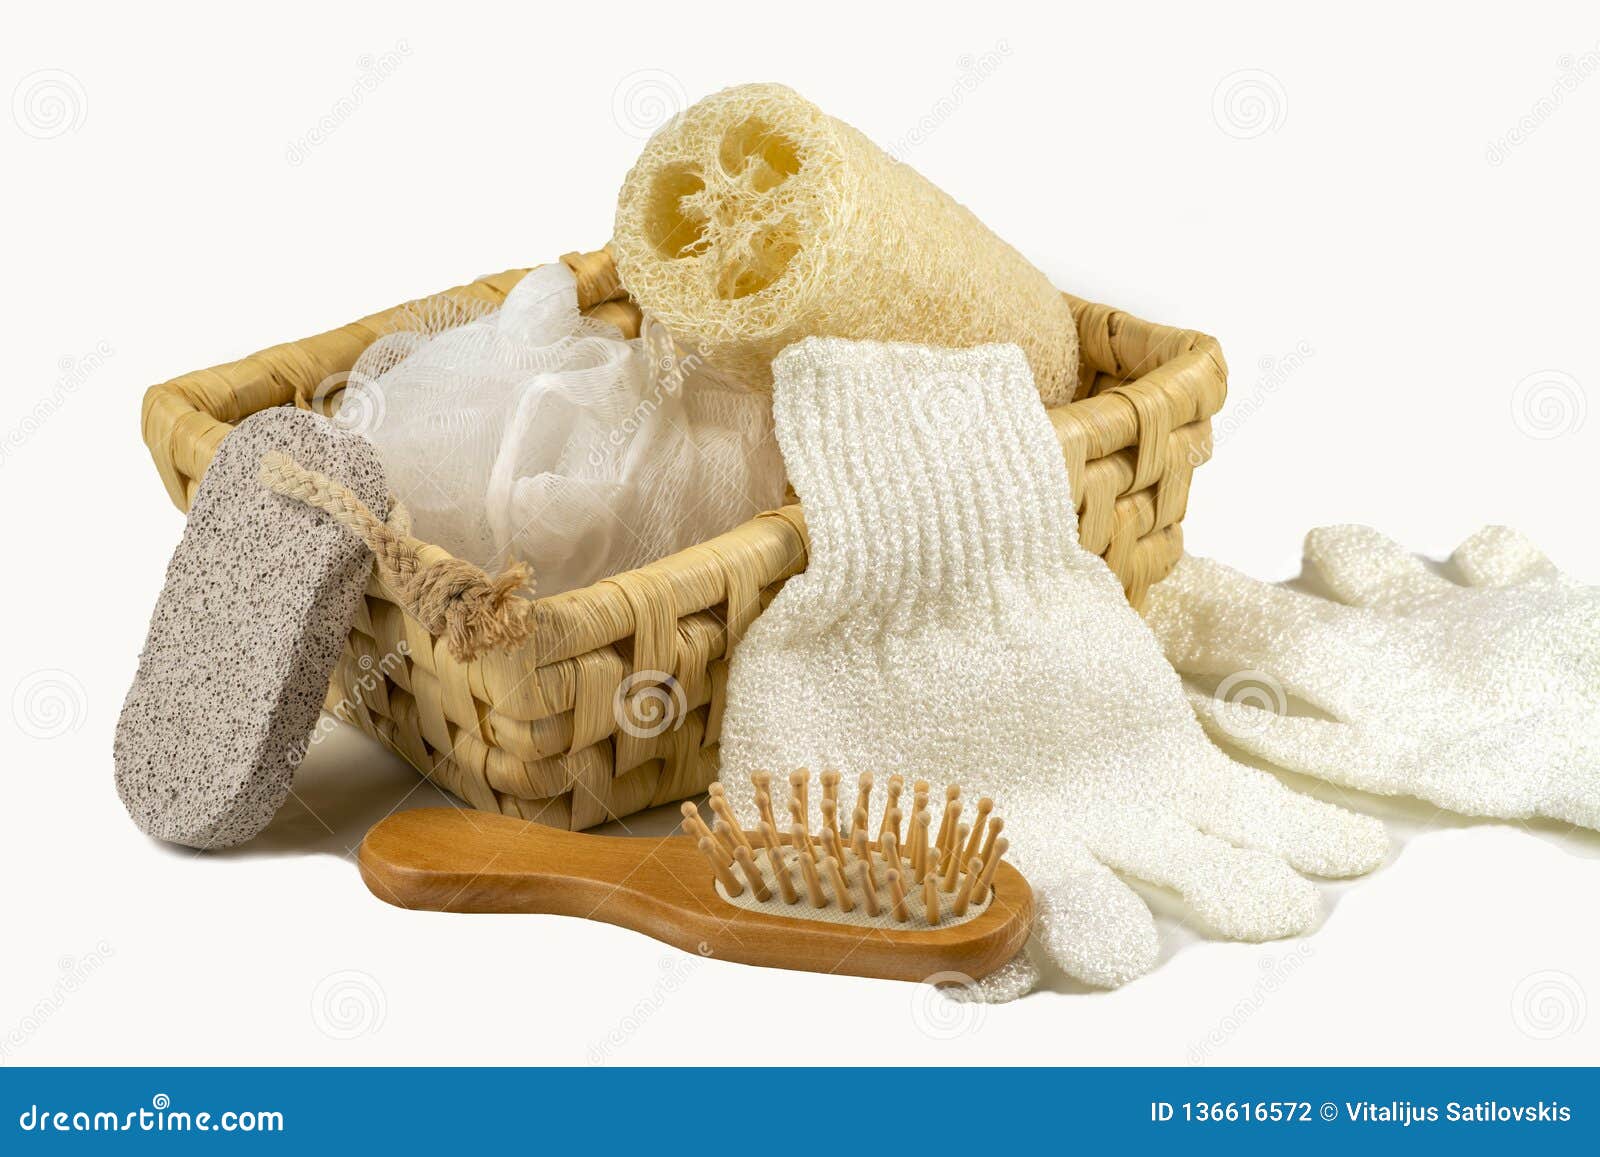 bath accessory, various spa and beauty threatment products, body scrub in wooden basket.